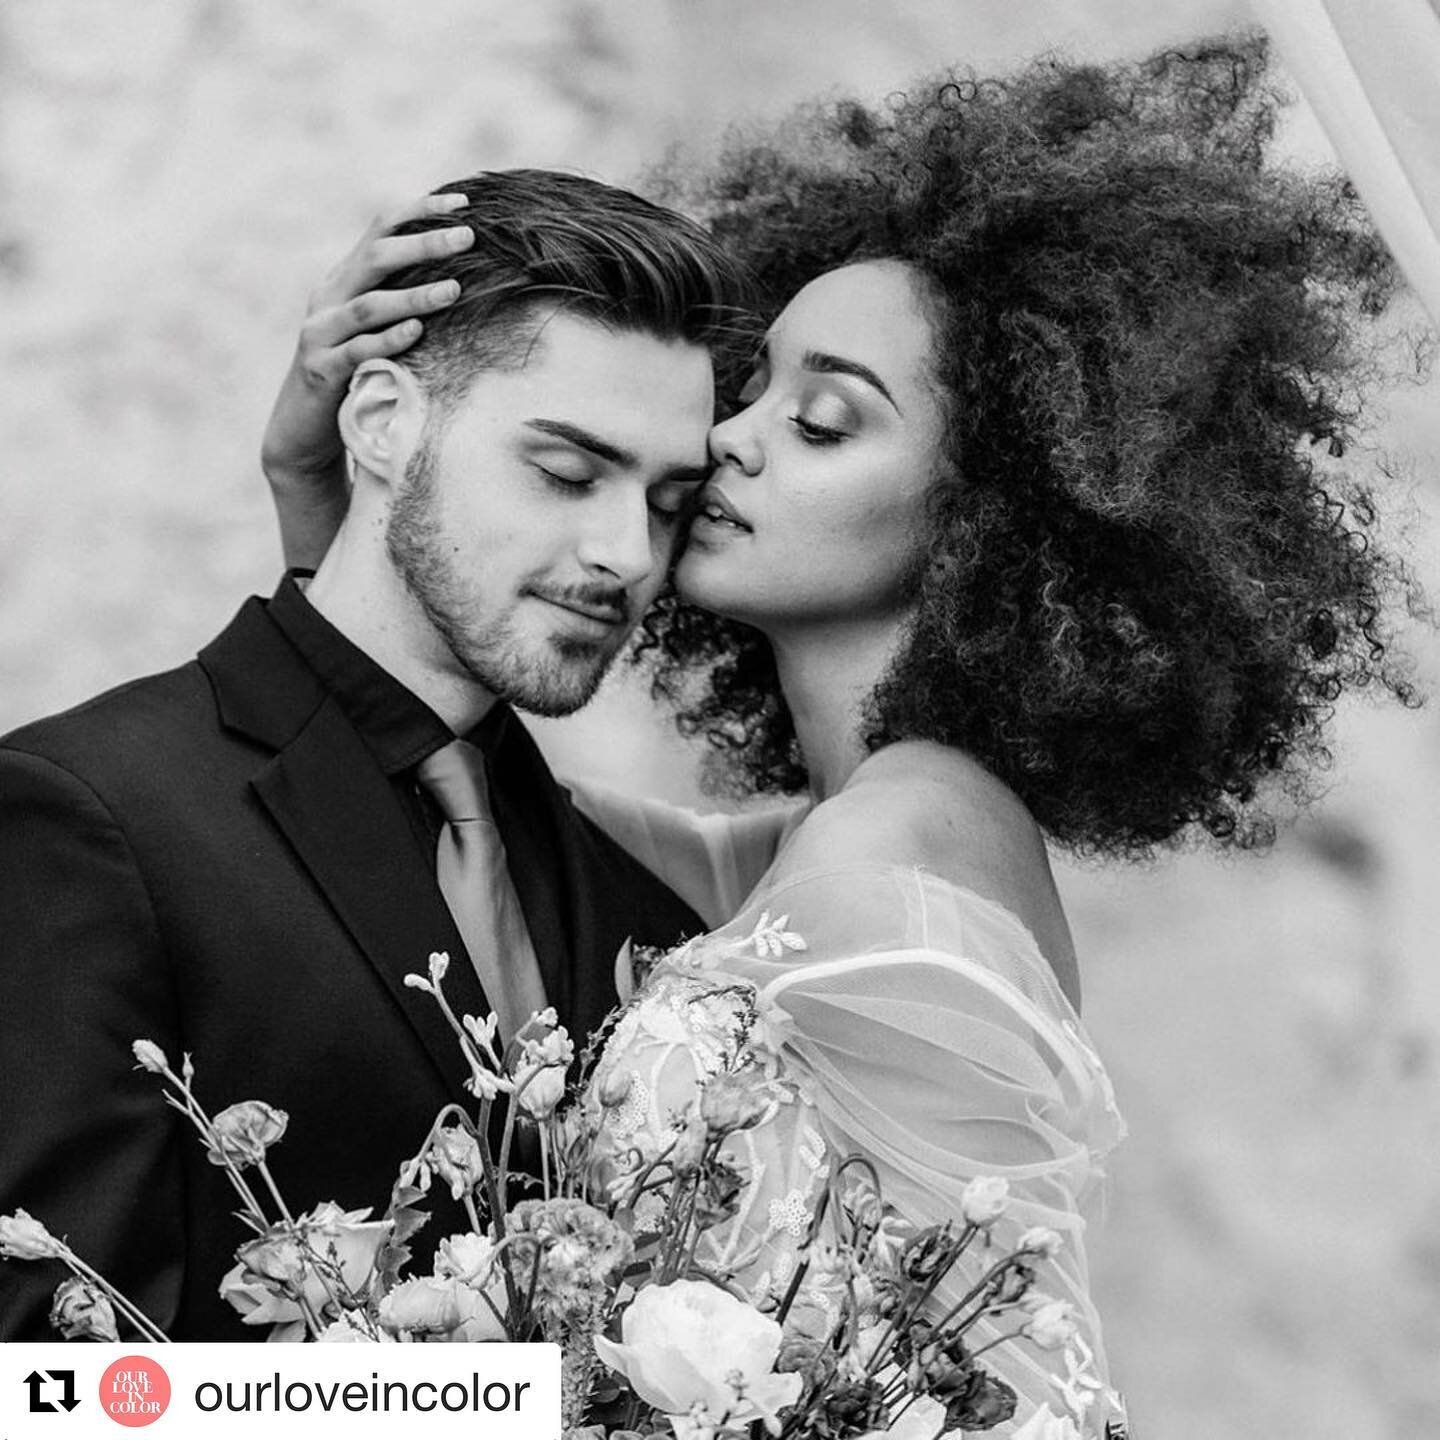 #Repost @ourloveincolor with @get_repost
・・・
⁠Here is a romantic styled wedding shoot from our Vol. II magazine! The model&rsquo;s gorgeous makeup and stunning natural hair are shown with true elegance against the backdrop of the historical Mission C